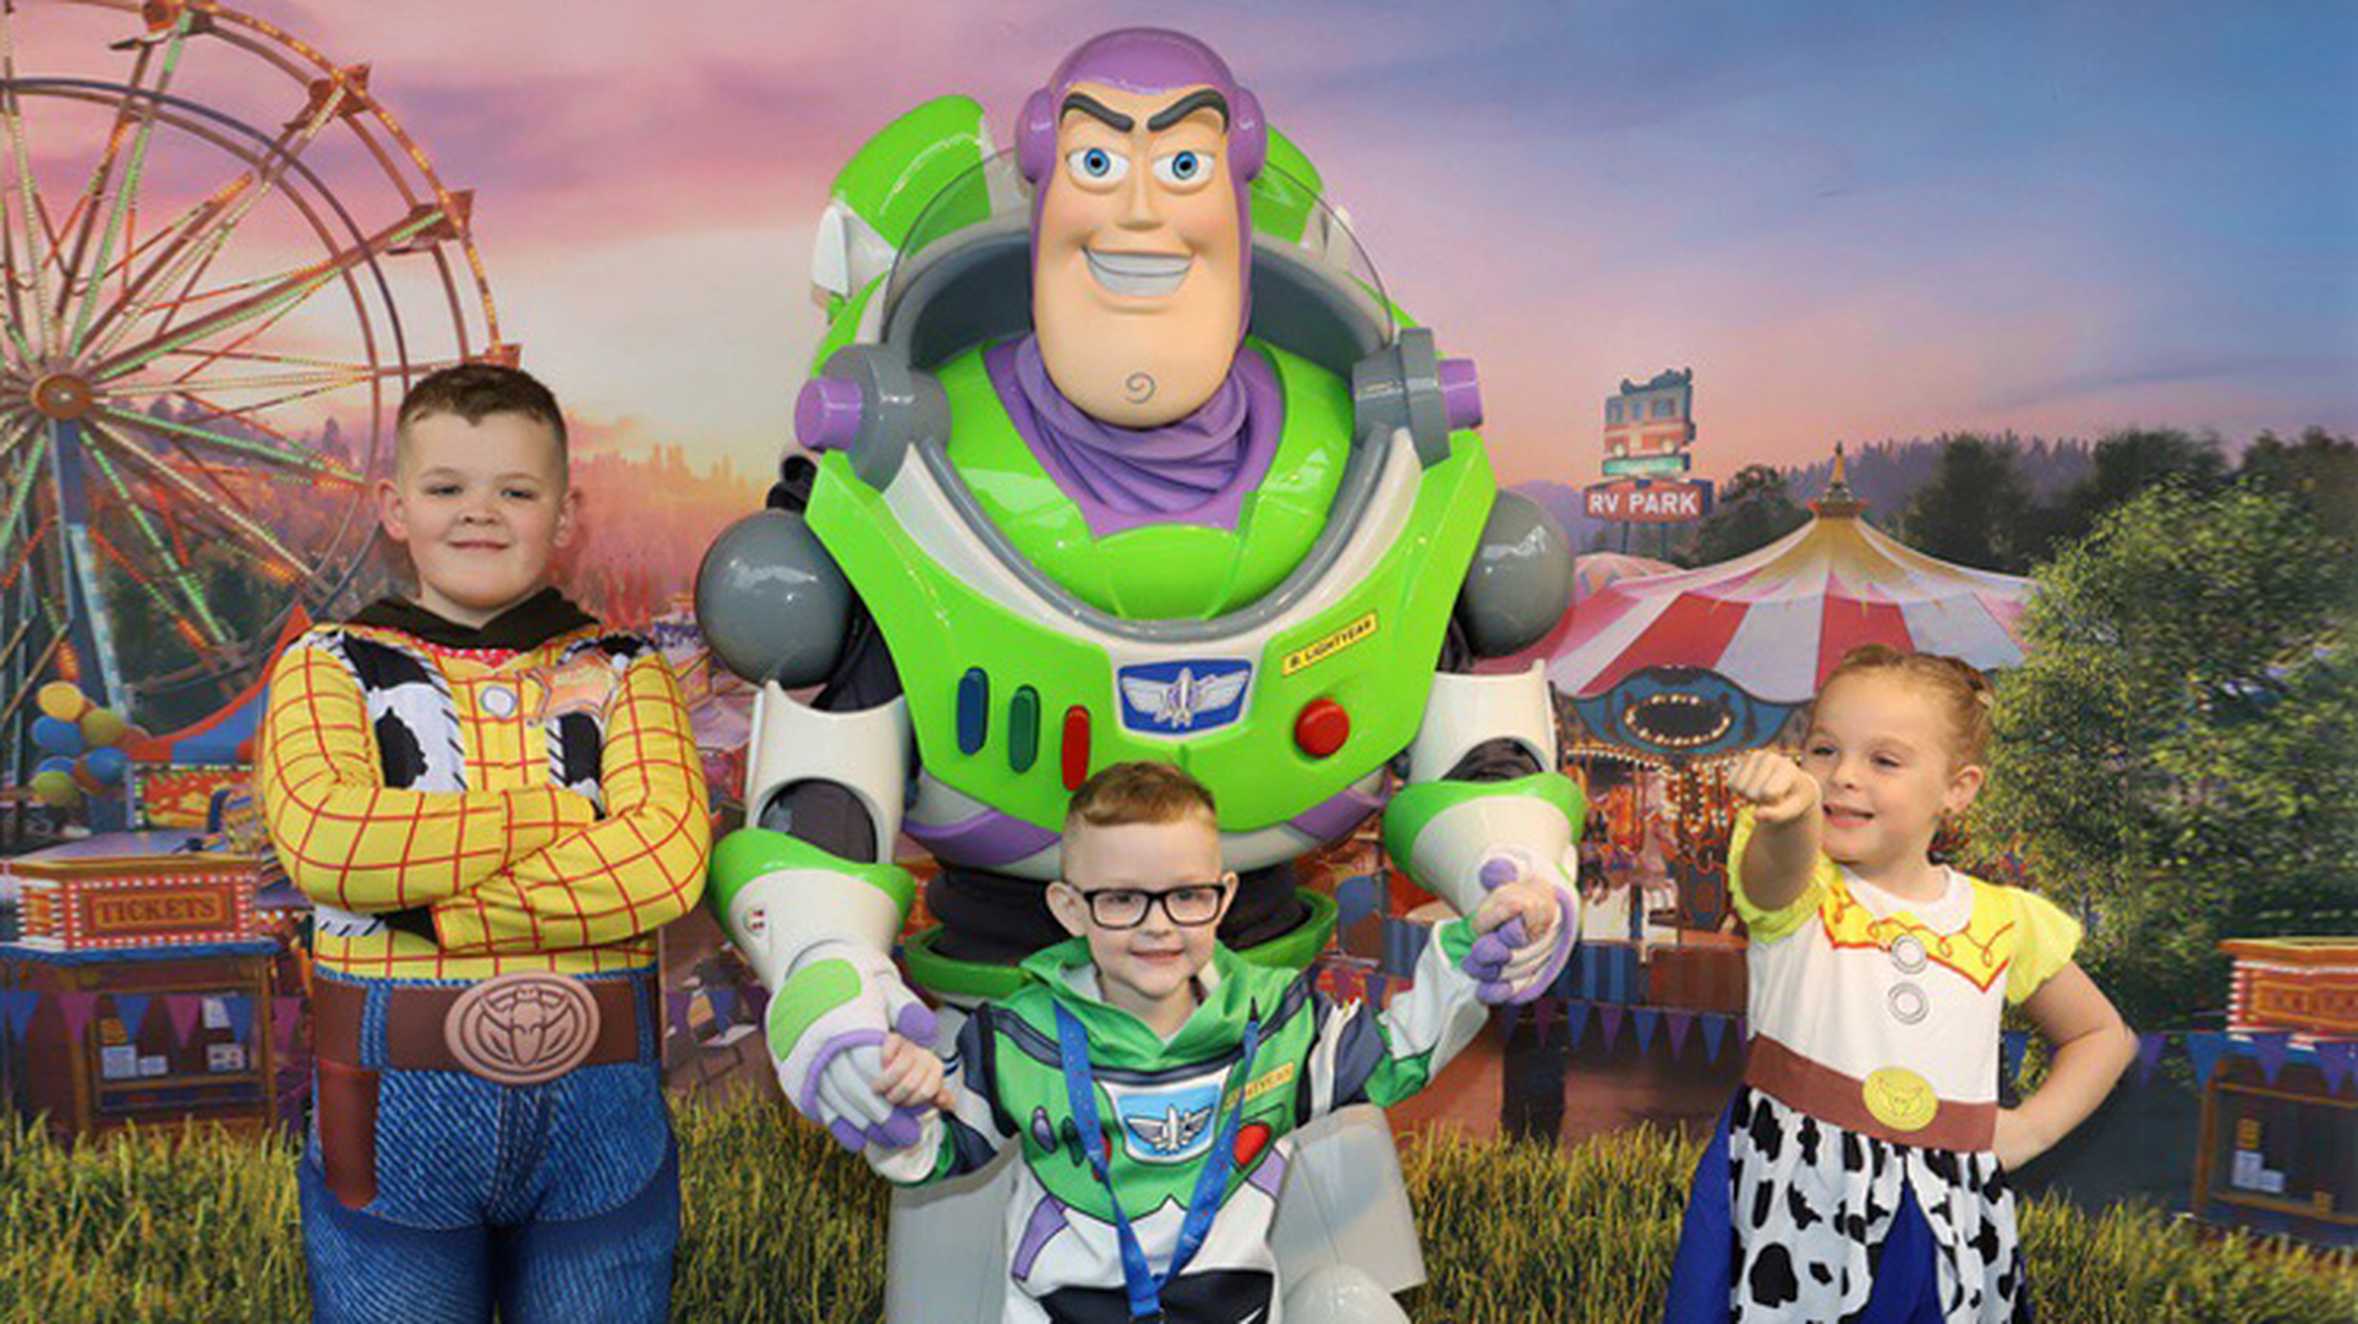 Patrick and his family posing with Buzz Lightyear from Toy Story.